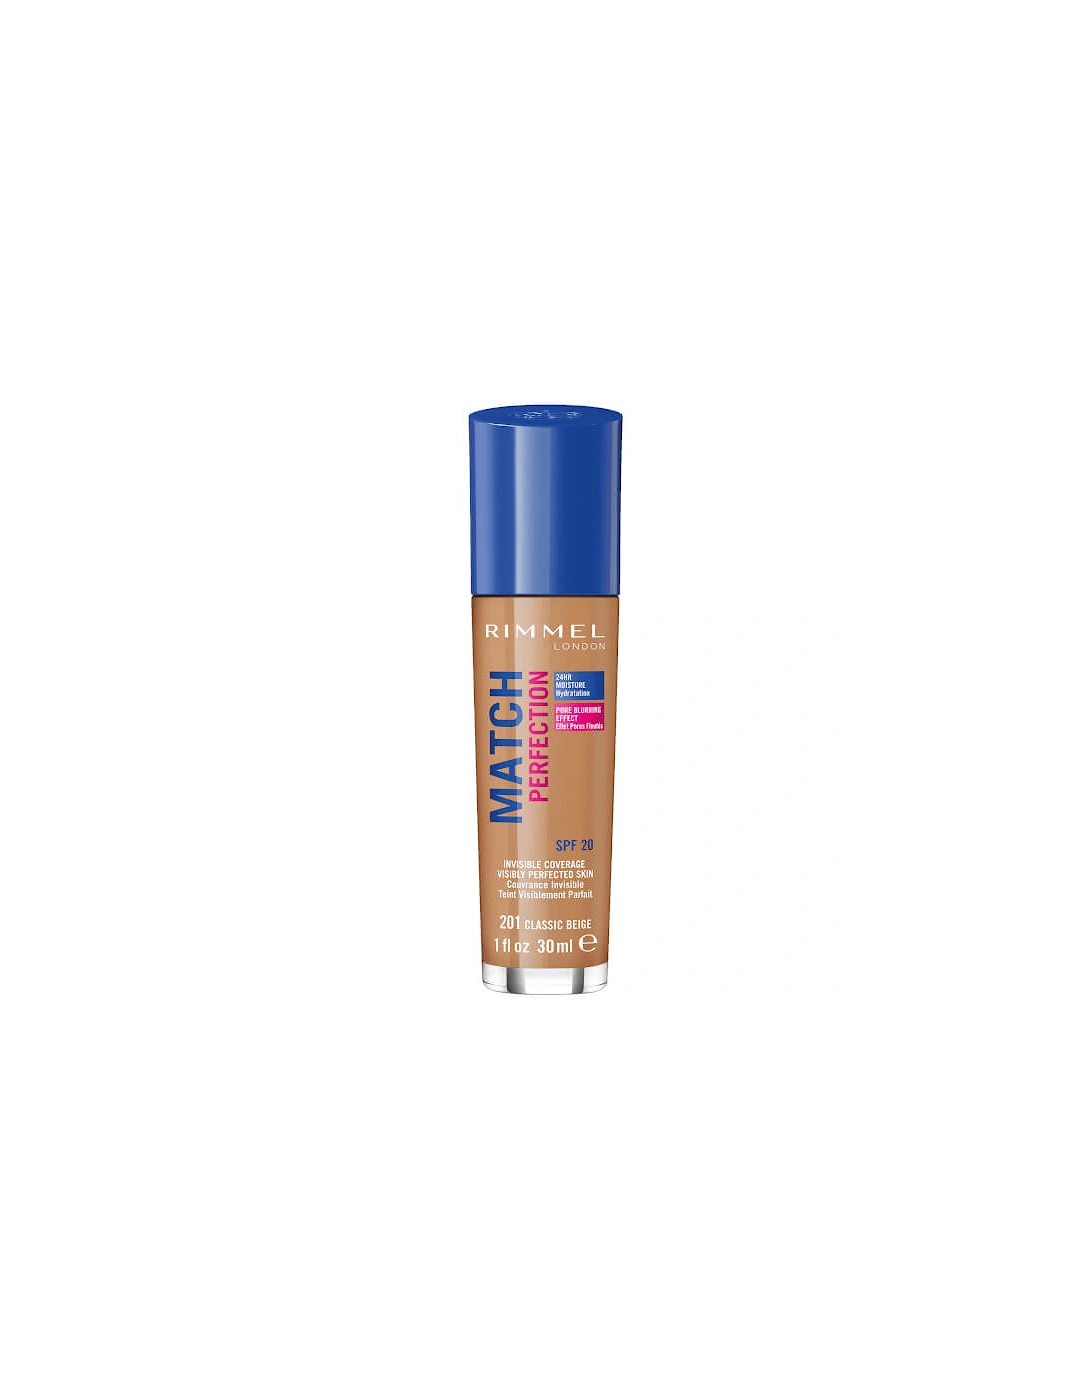 London SPF 20 Match Perfection Foundation - Classic Beige, 2 of 1